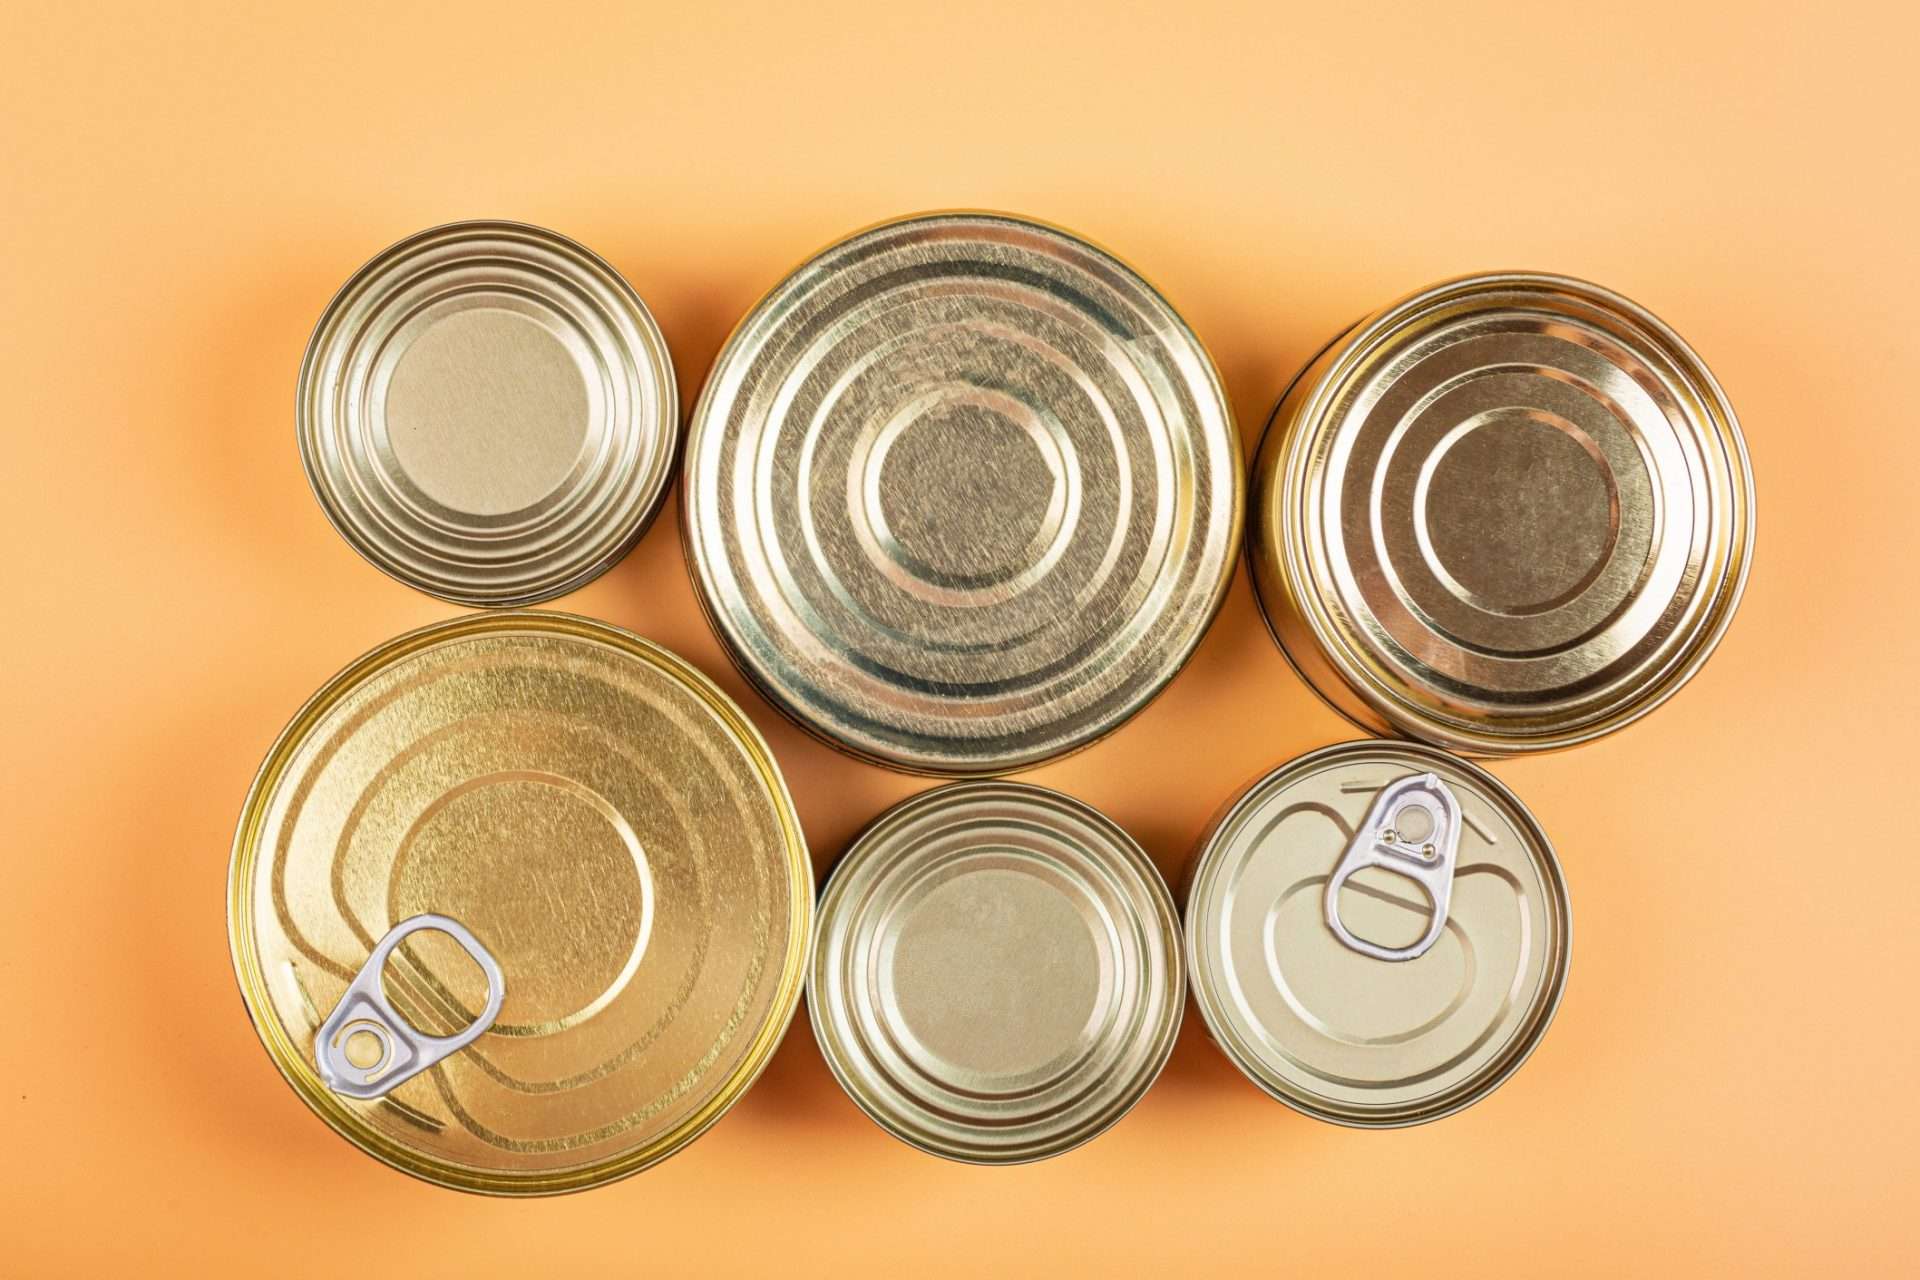 Overhead view of tops of cans on orange background